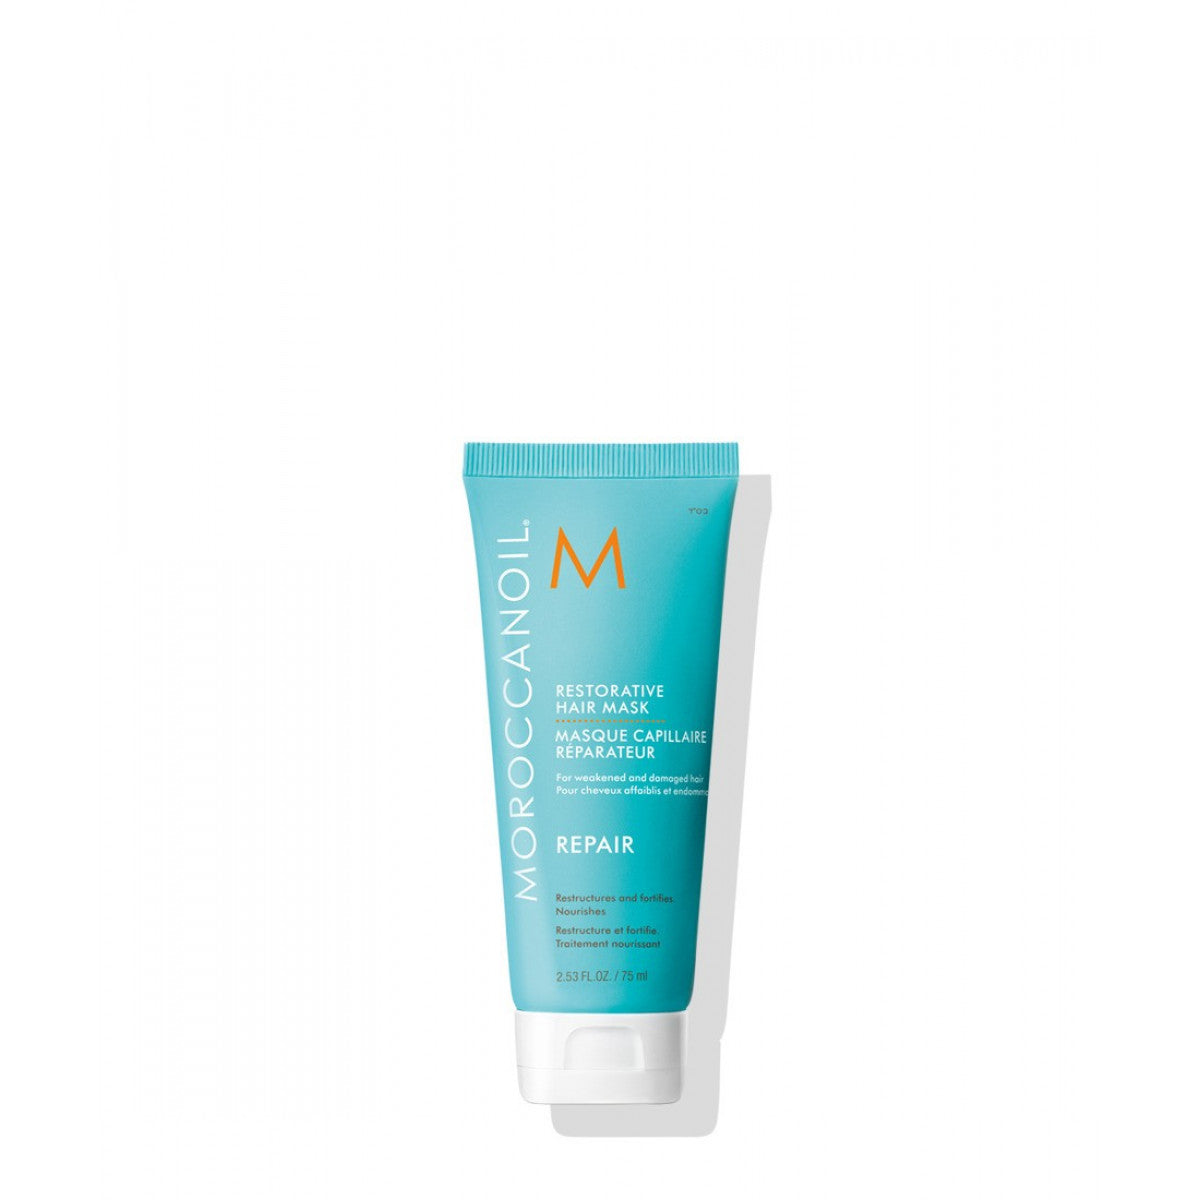 Moroccanoil - Restorative Hair Mask - 75ml | 2.53oz - by Moroccanoil |ProCare Outlet|